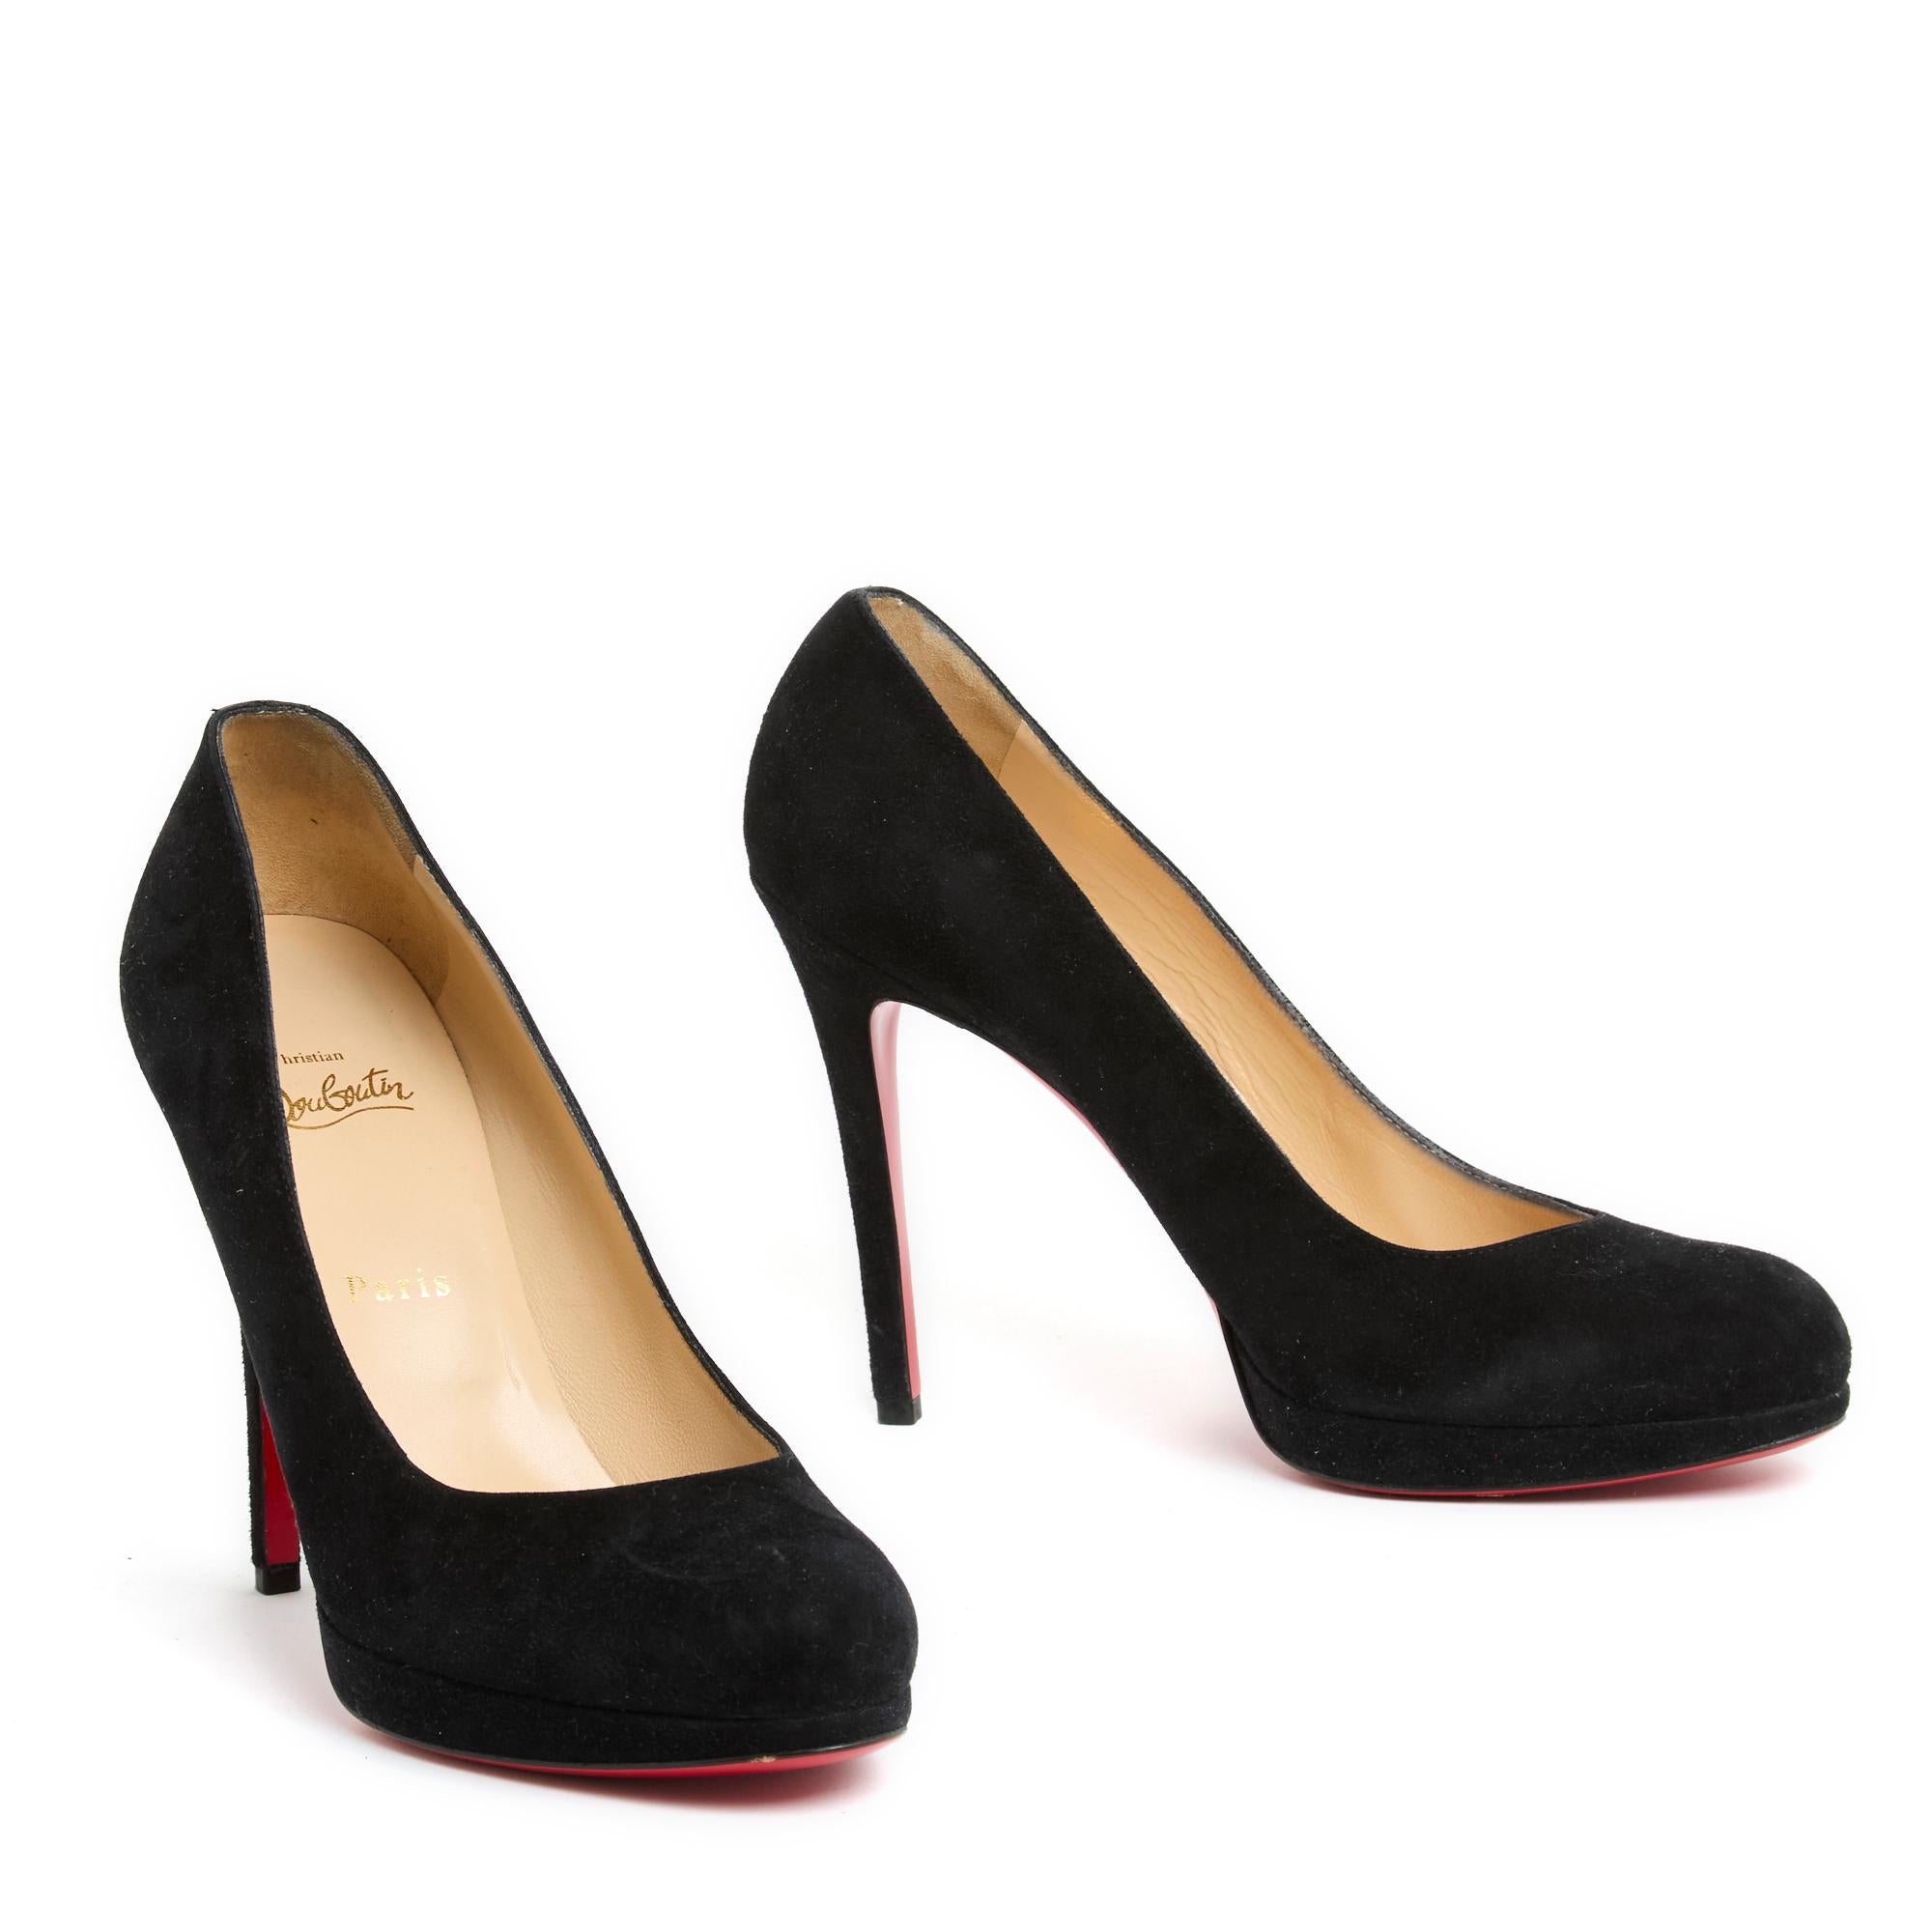 Christian Louboutin Fifi model pumps (or Simple Pumps) in black suede, small platform in front. Size 40FR i.e. UK6.5 and US8, heel 12 cm, front sole 2 cm (including 1 cm inside), insole 25.7 cm. The pumps have been worn only once and they are in